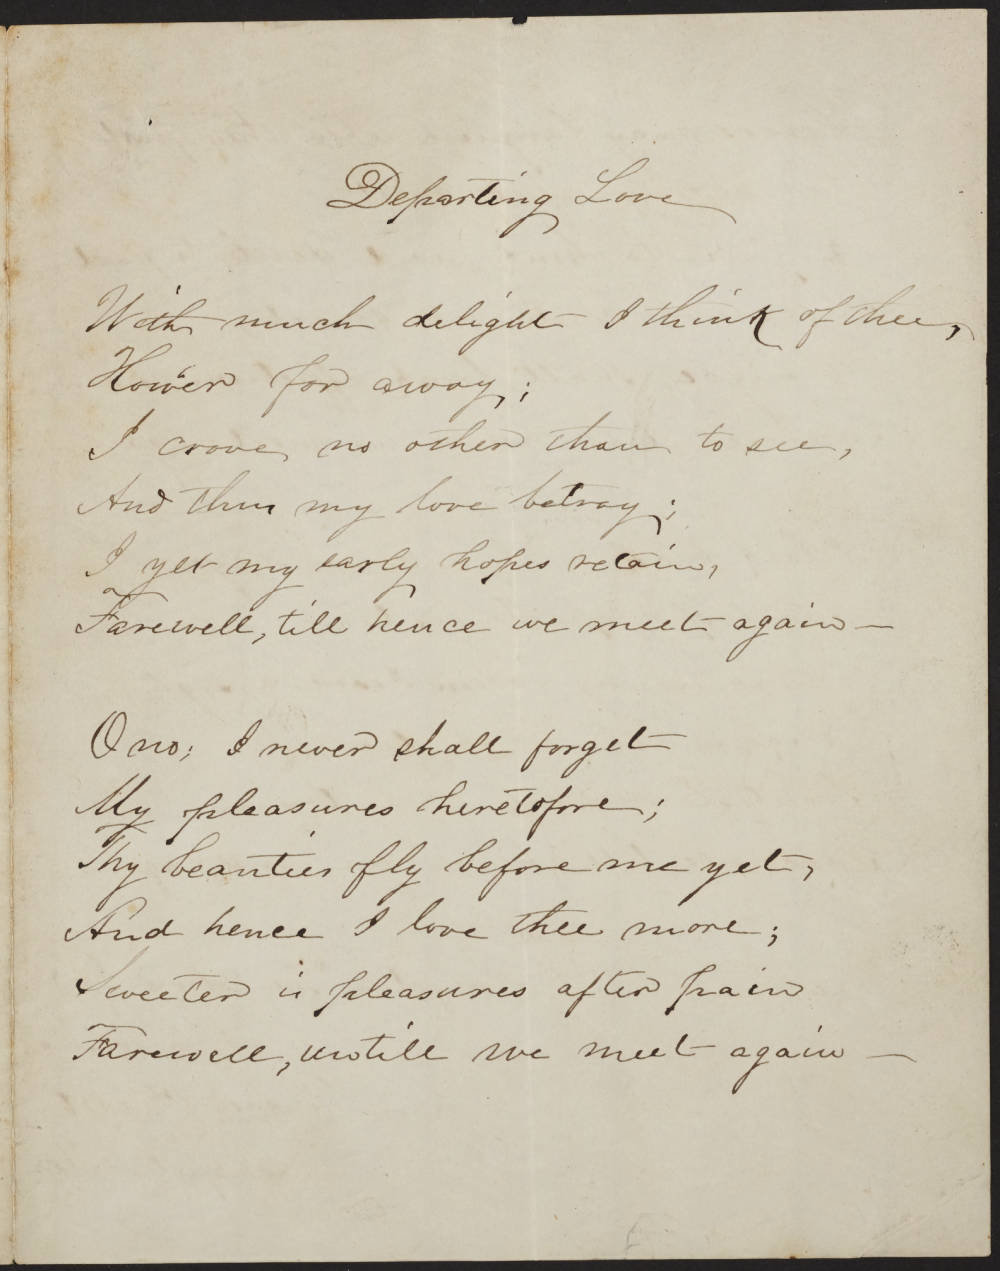 George Moses Horton was a poet born into slavery in Chatham County. Shown here is his poem, ‘Departed Love,’ digitized from the original by the Southern Historical Collection in the Wilson Special Collections Library at UNC library.